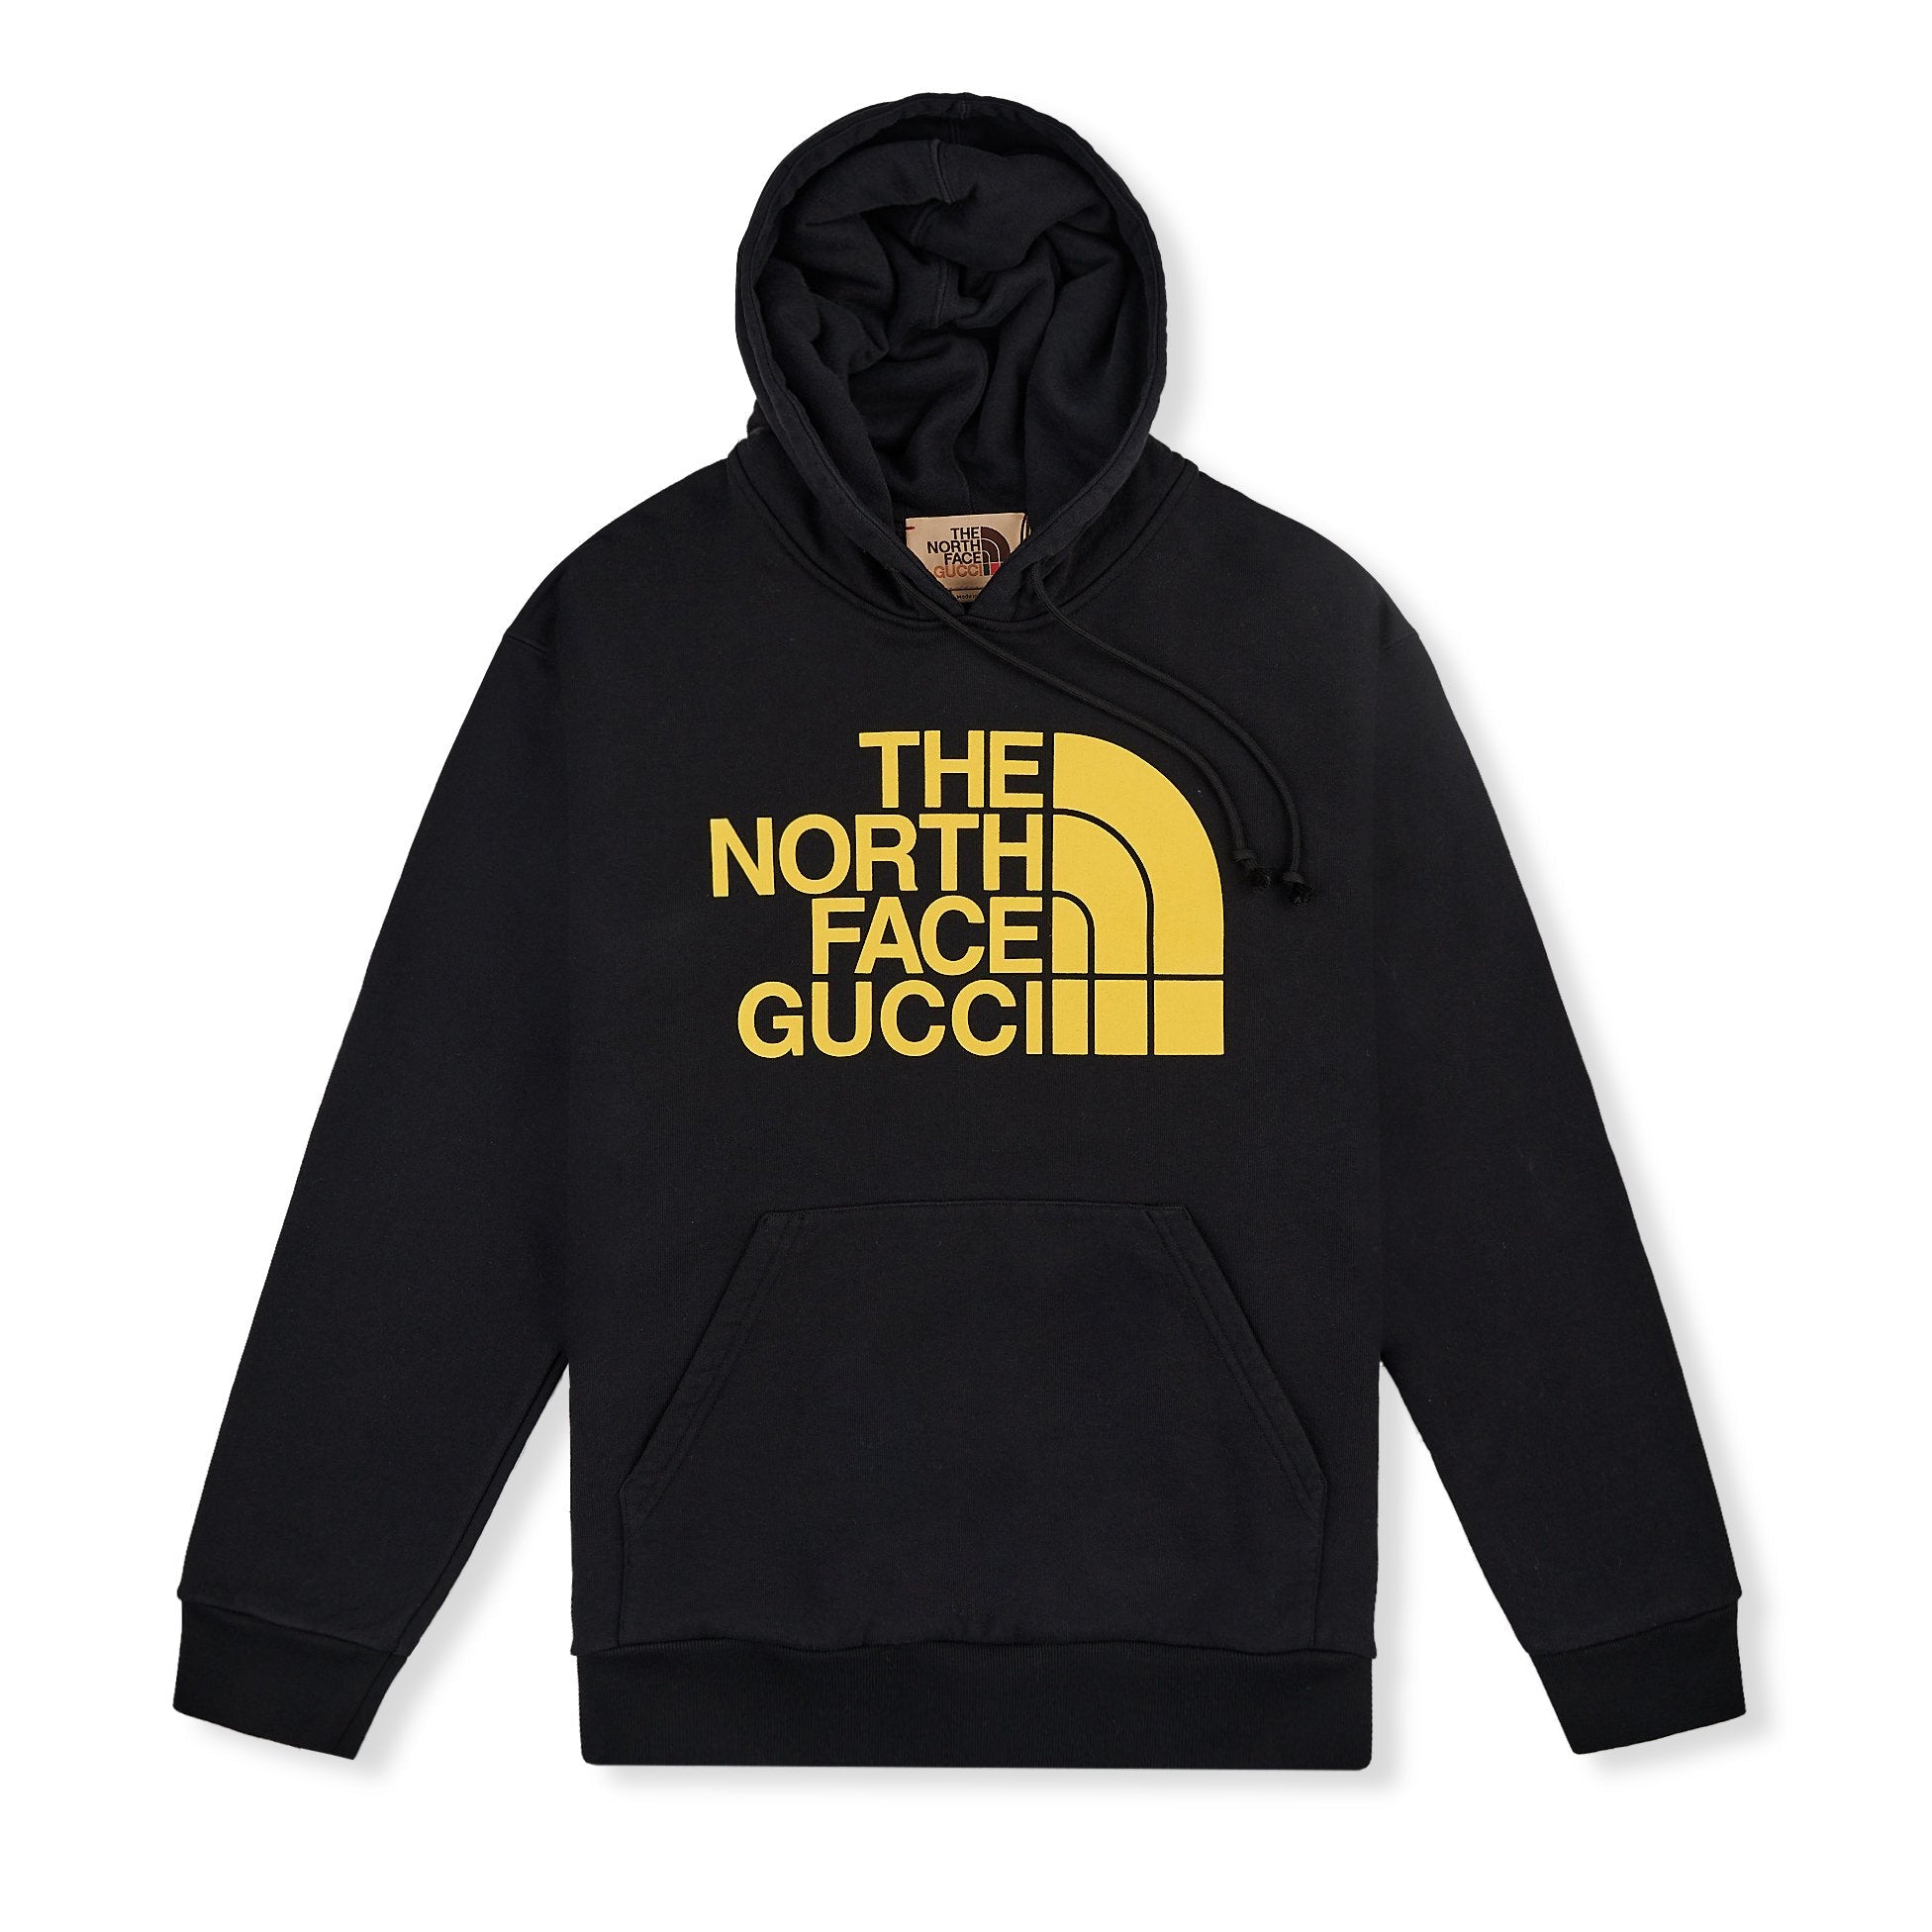 Gucci x The North Face Black Yellow Hoodie